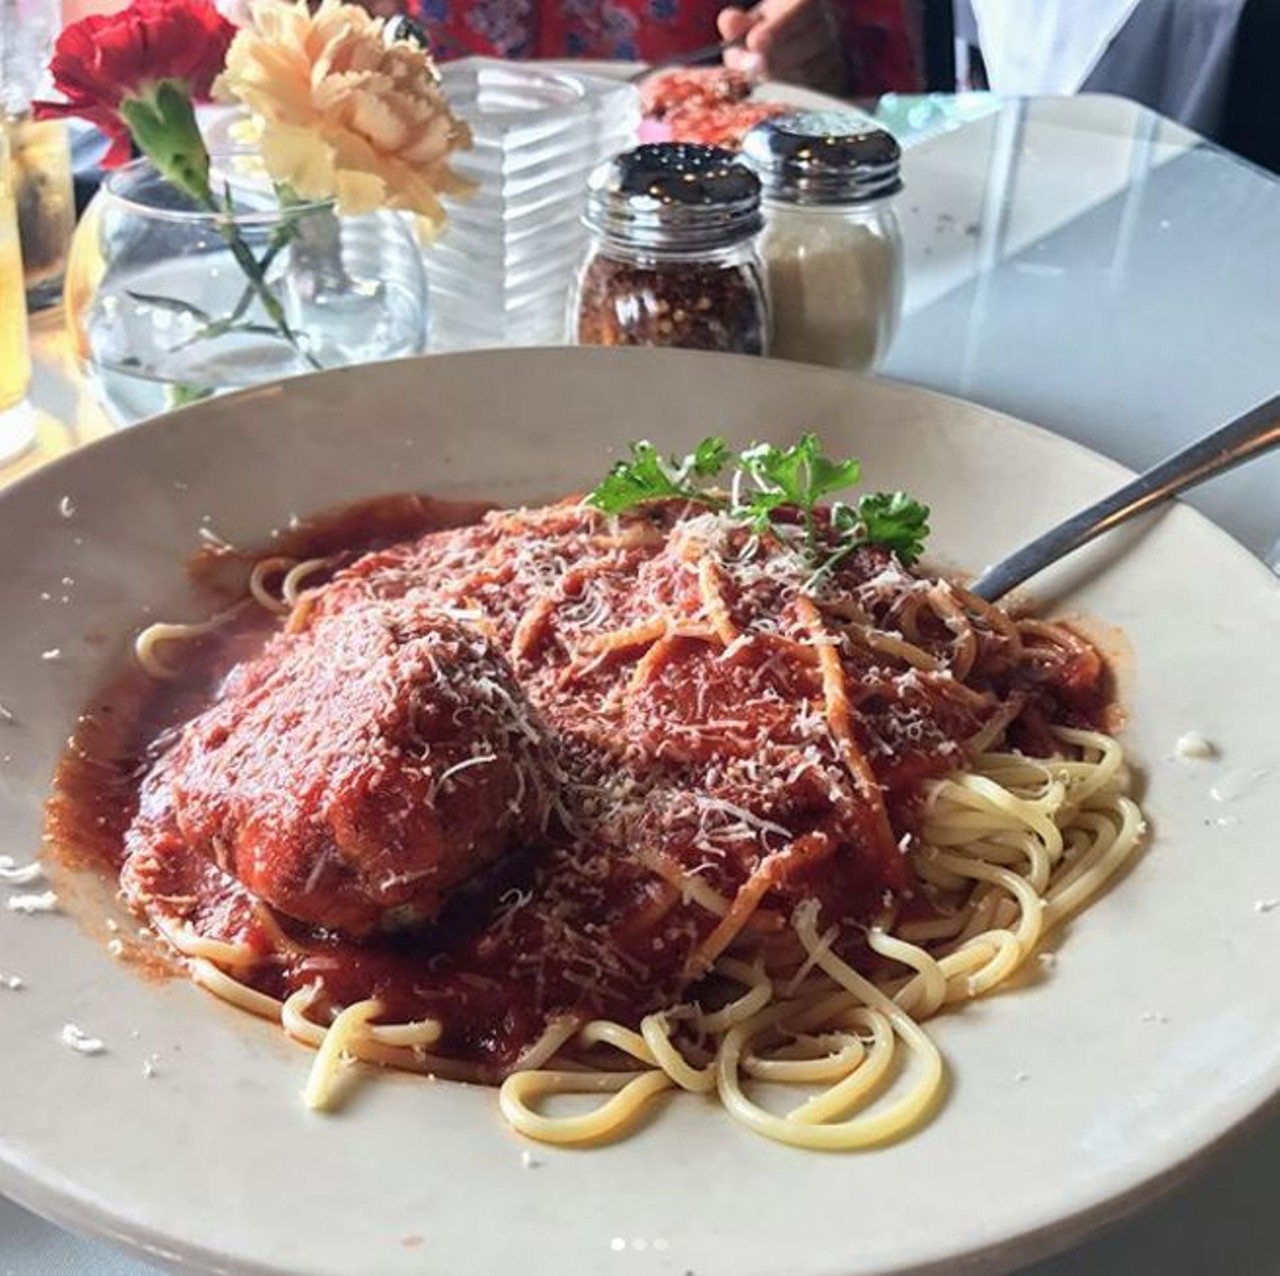 Capparelli&#146;s On Main
2524 N Main Ave., (210) 735-5757, capparellisonmain.com
Veal, chicken, seafood, your pasta will be delicious no matter what protein you get. The trout almondine and linguine with blue mussels are always a good choice.
Photo via Instagram, john_stiles_